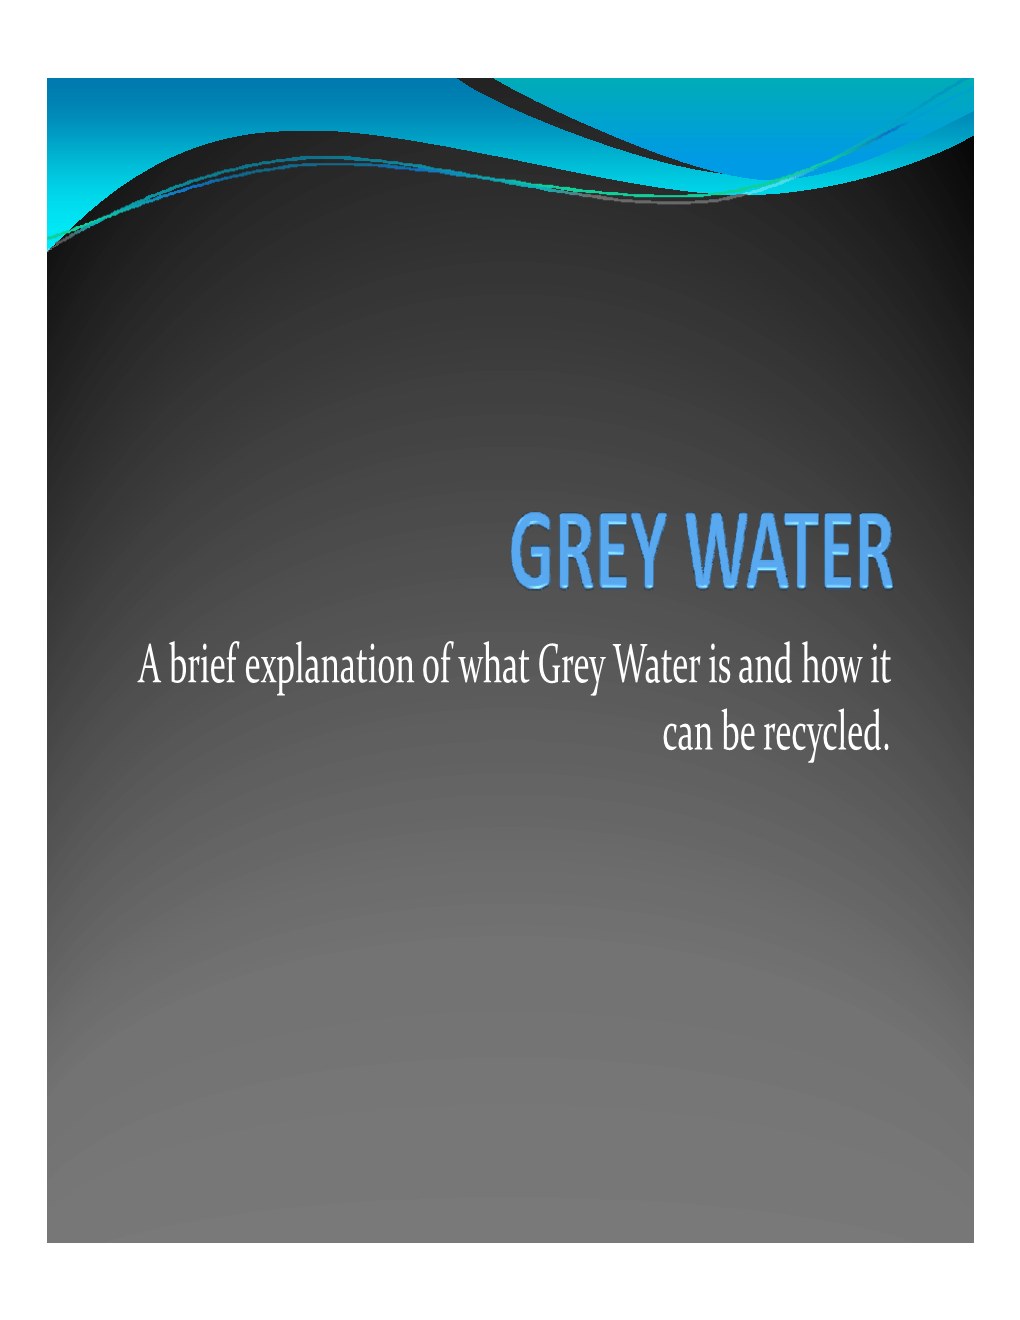 A Brief Explanation of What Grey Water Is and How It Can Be Recycled Can